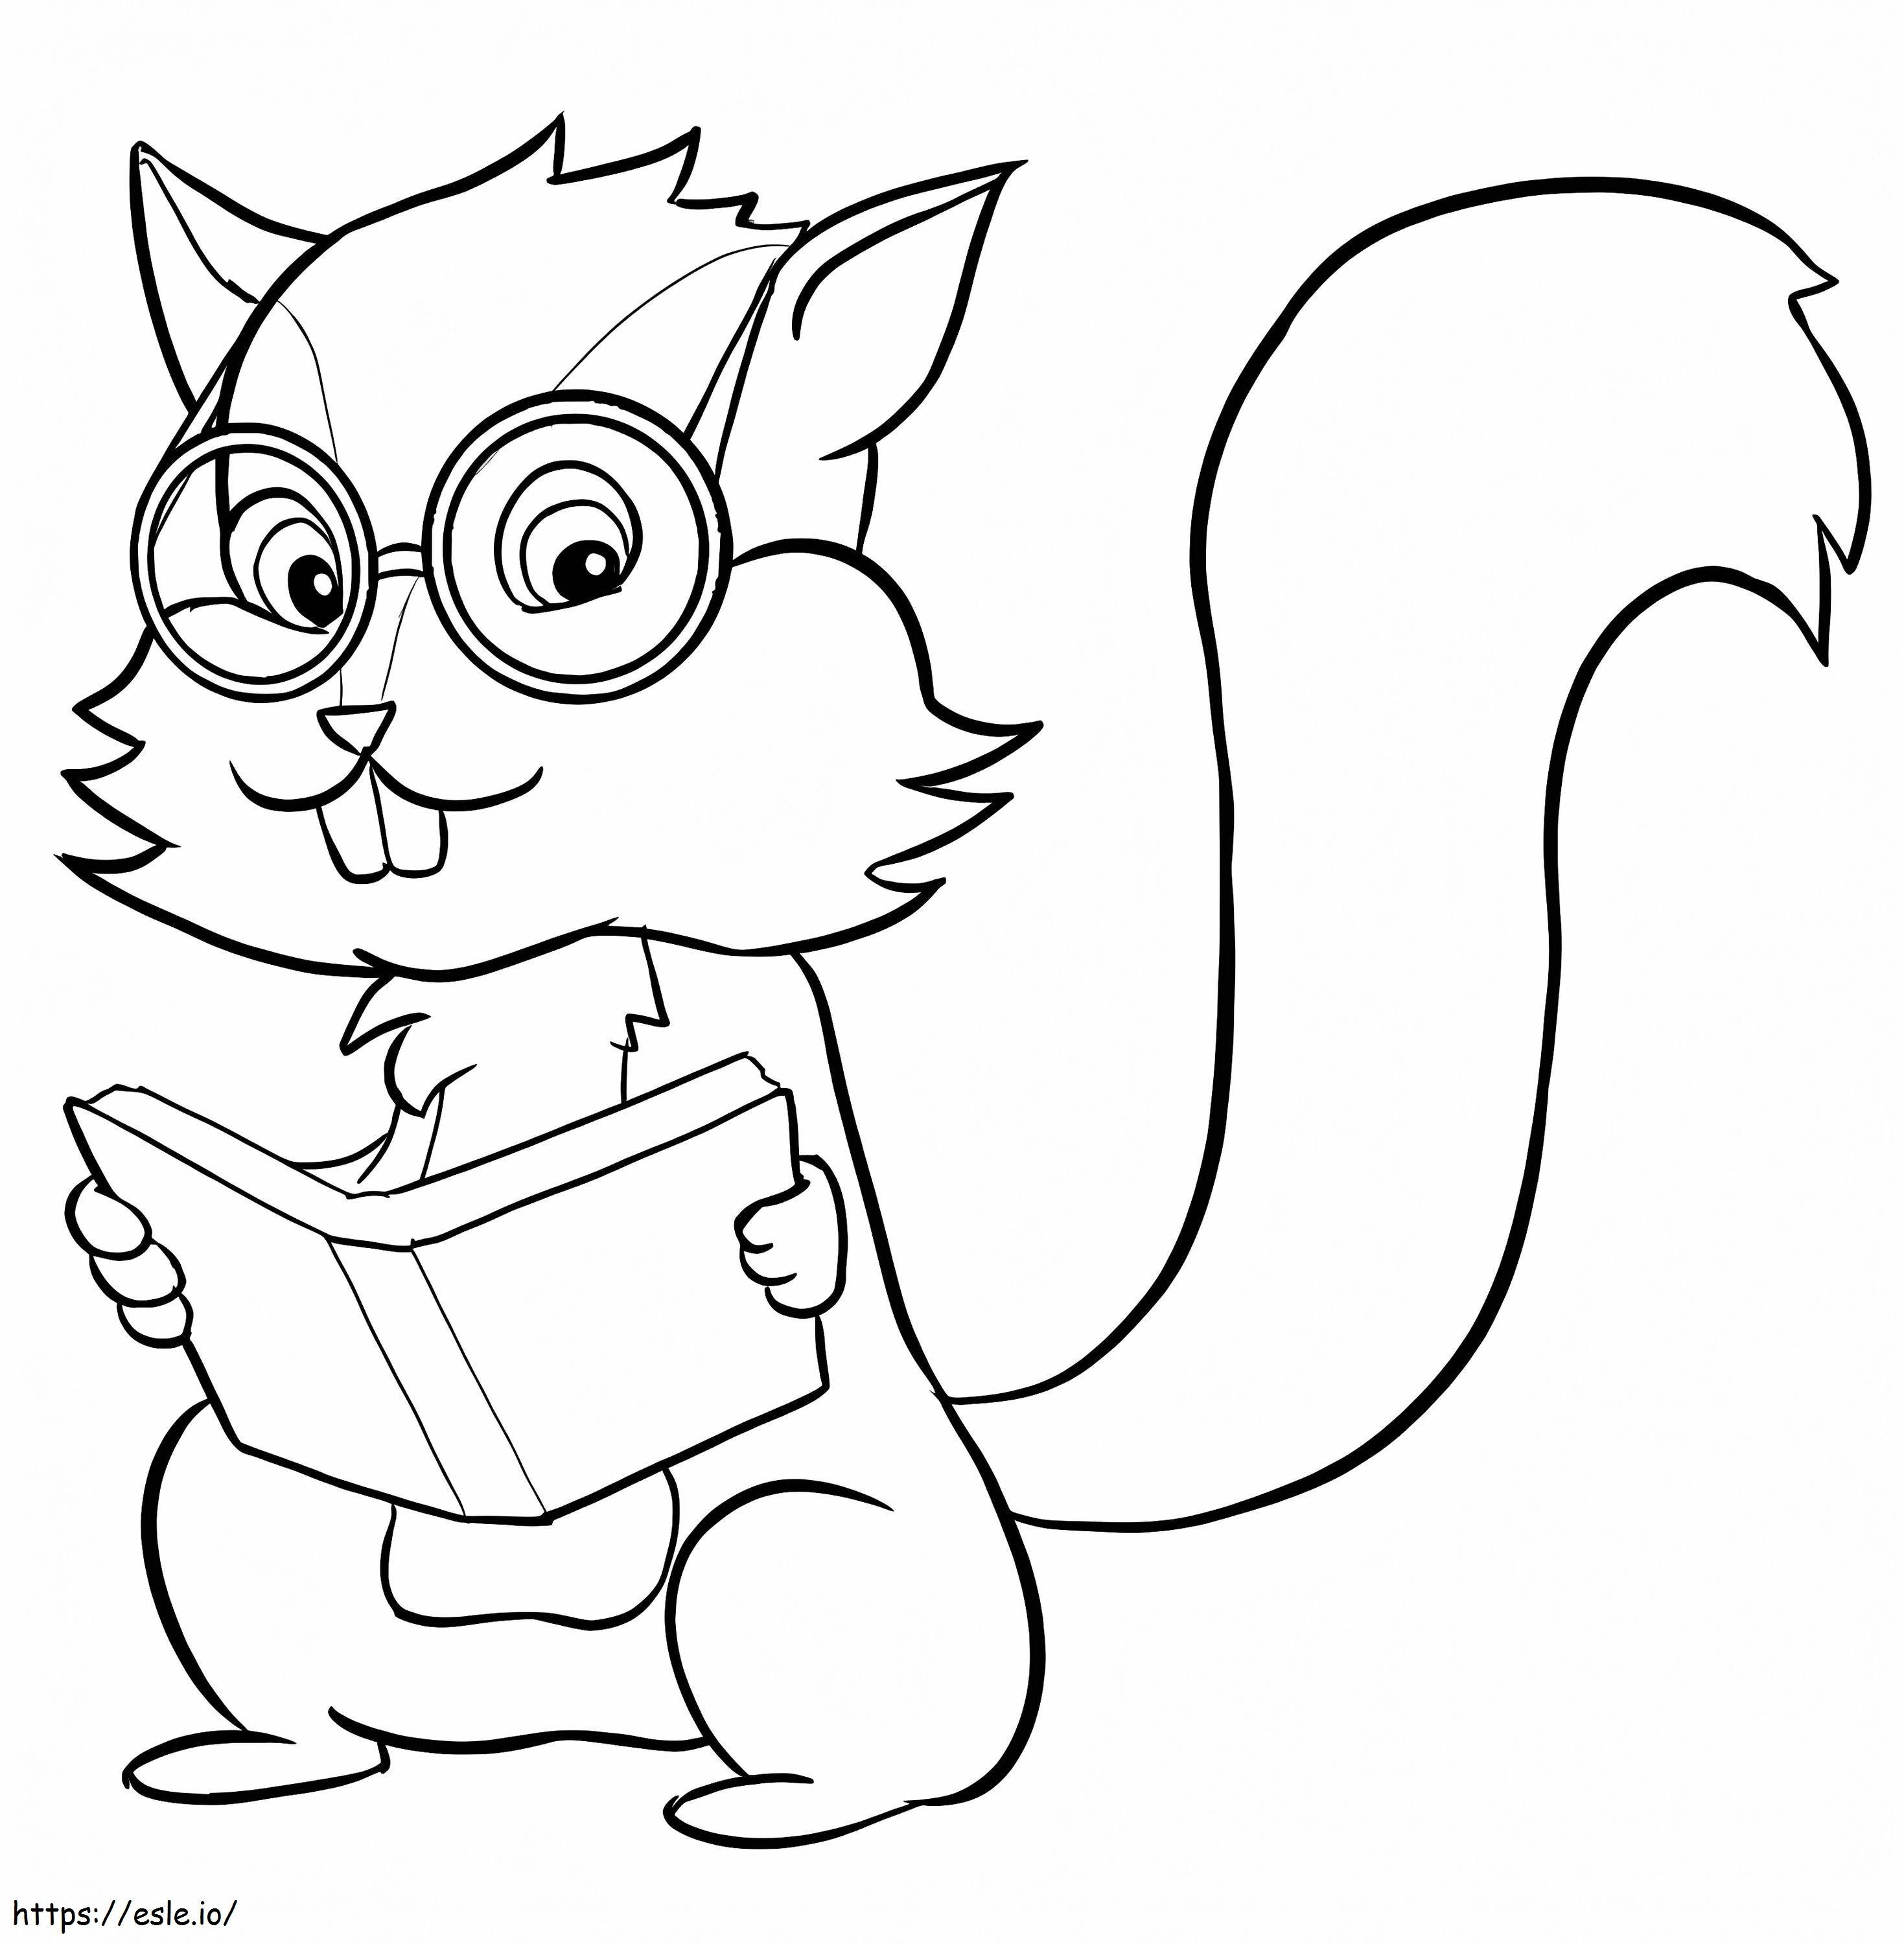 Chipmunk Reading Book coloring page